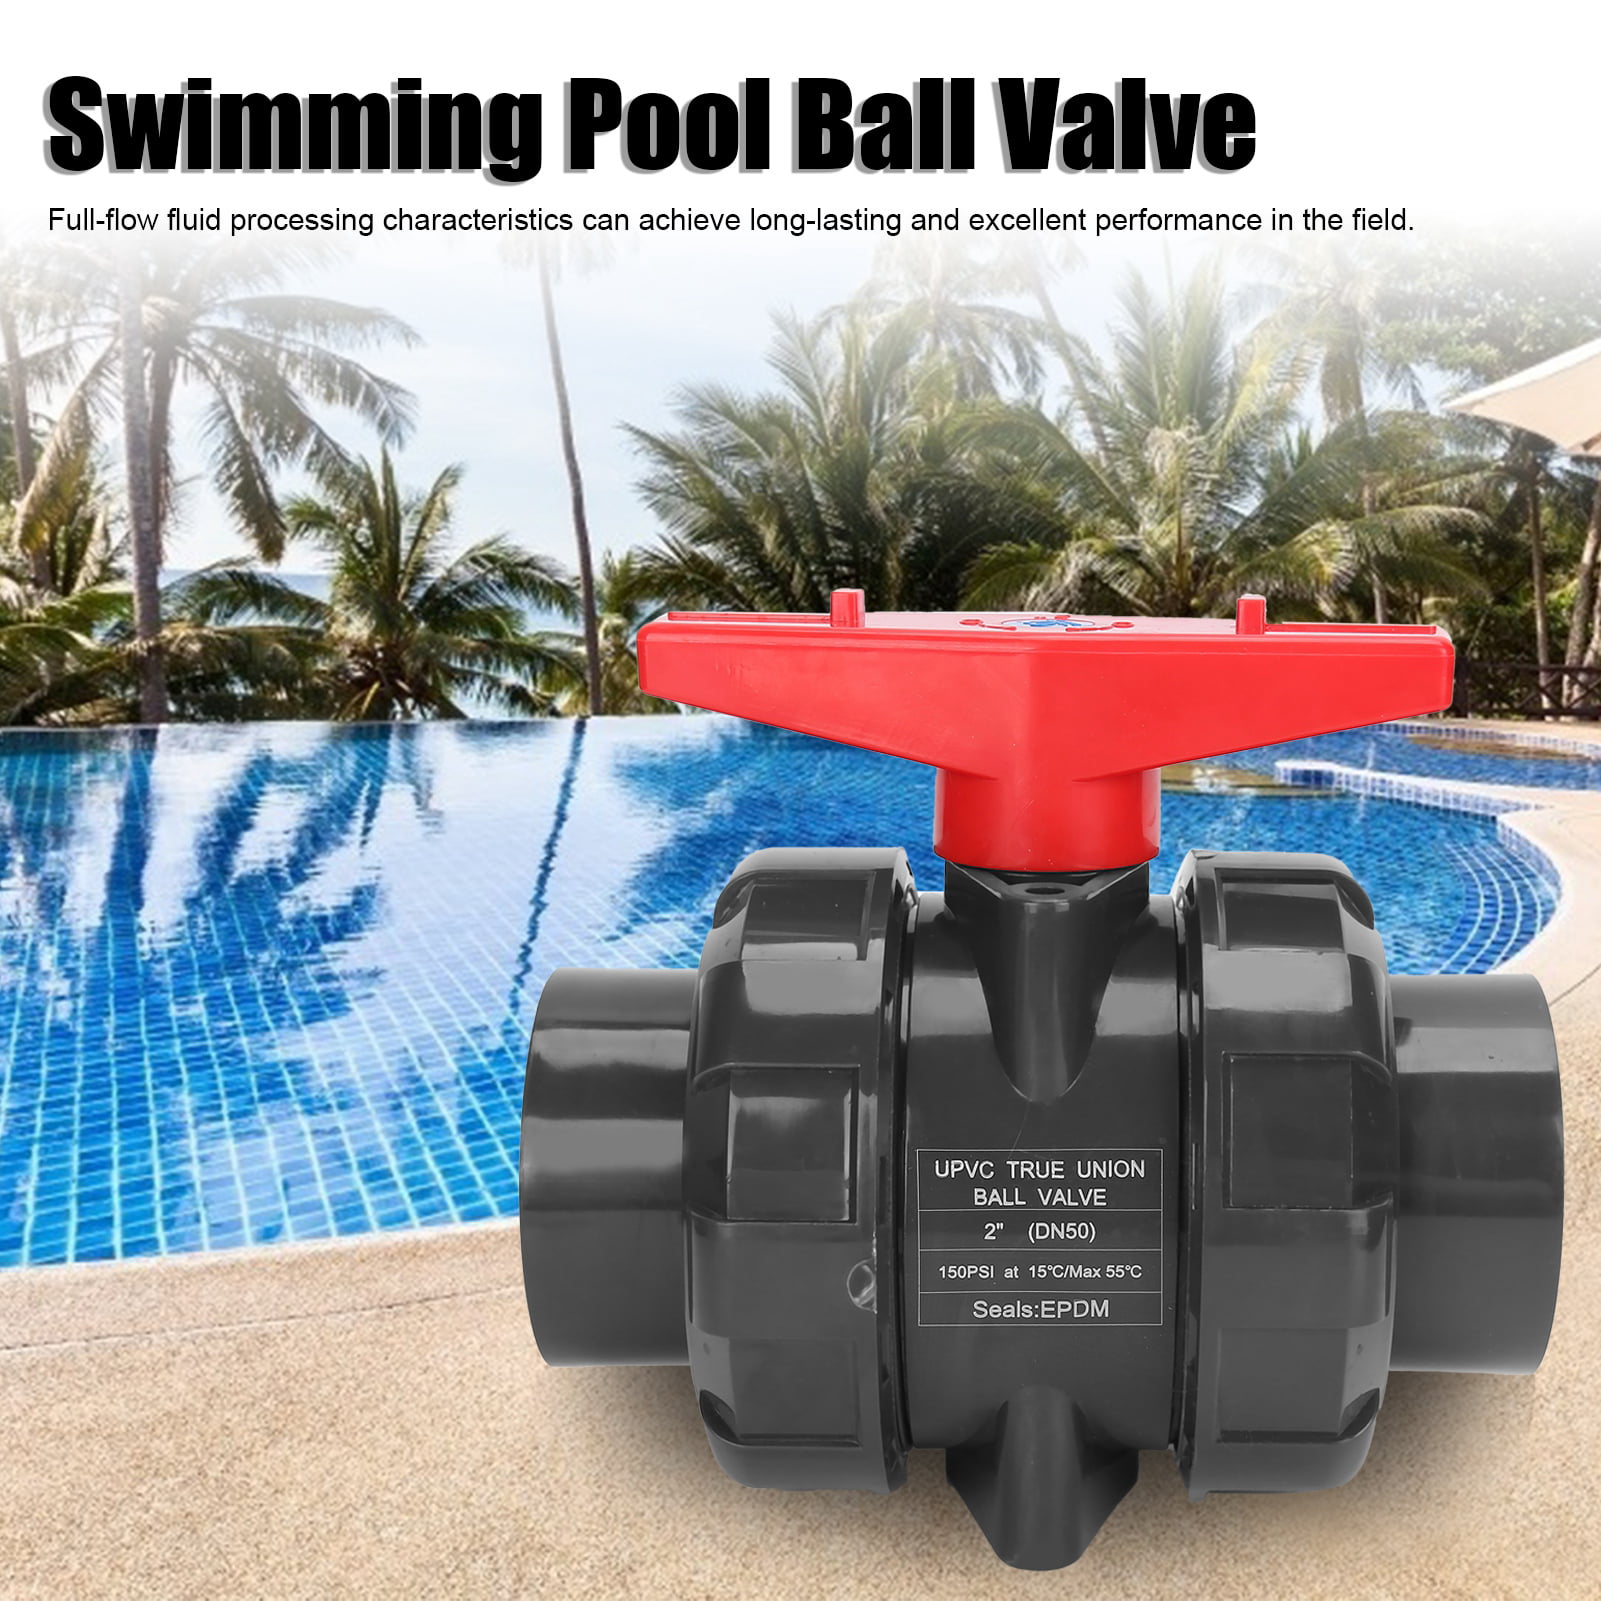 01 Ball Valve 2 EPDM O‑Rings and 2 PTFE Valve Seats,DN50 G2 PVC Double Union Compact Ball Valve for Swimming Pool Aquarium Fittings Accessory